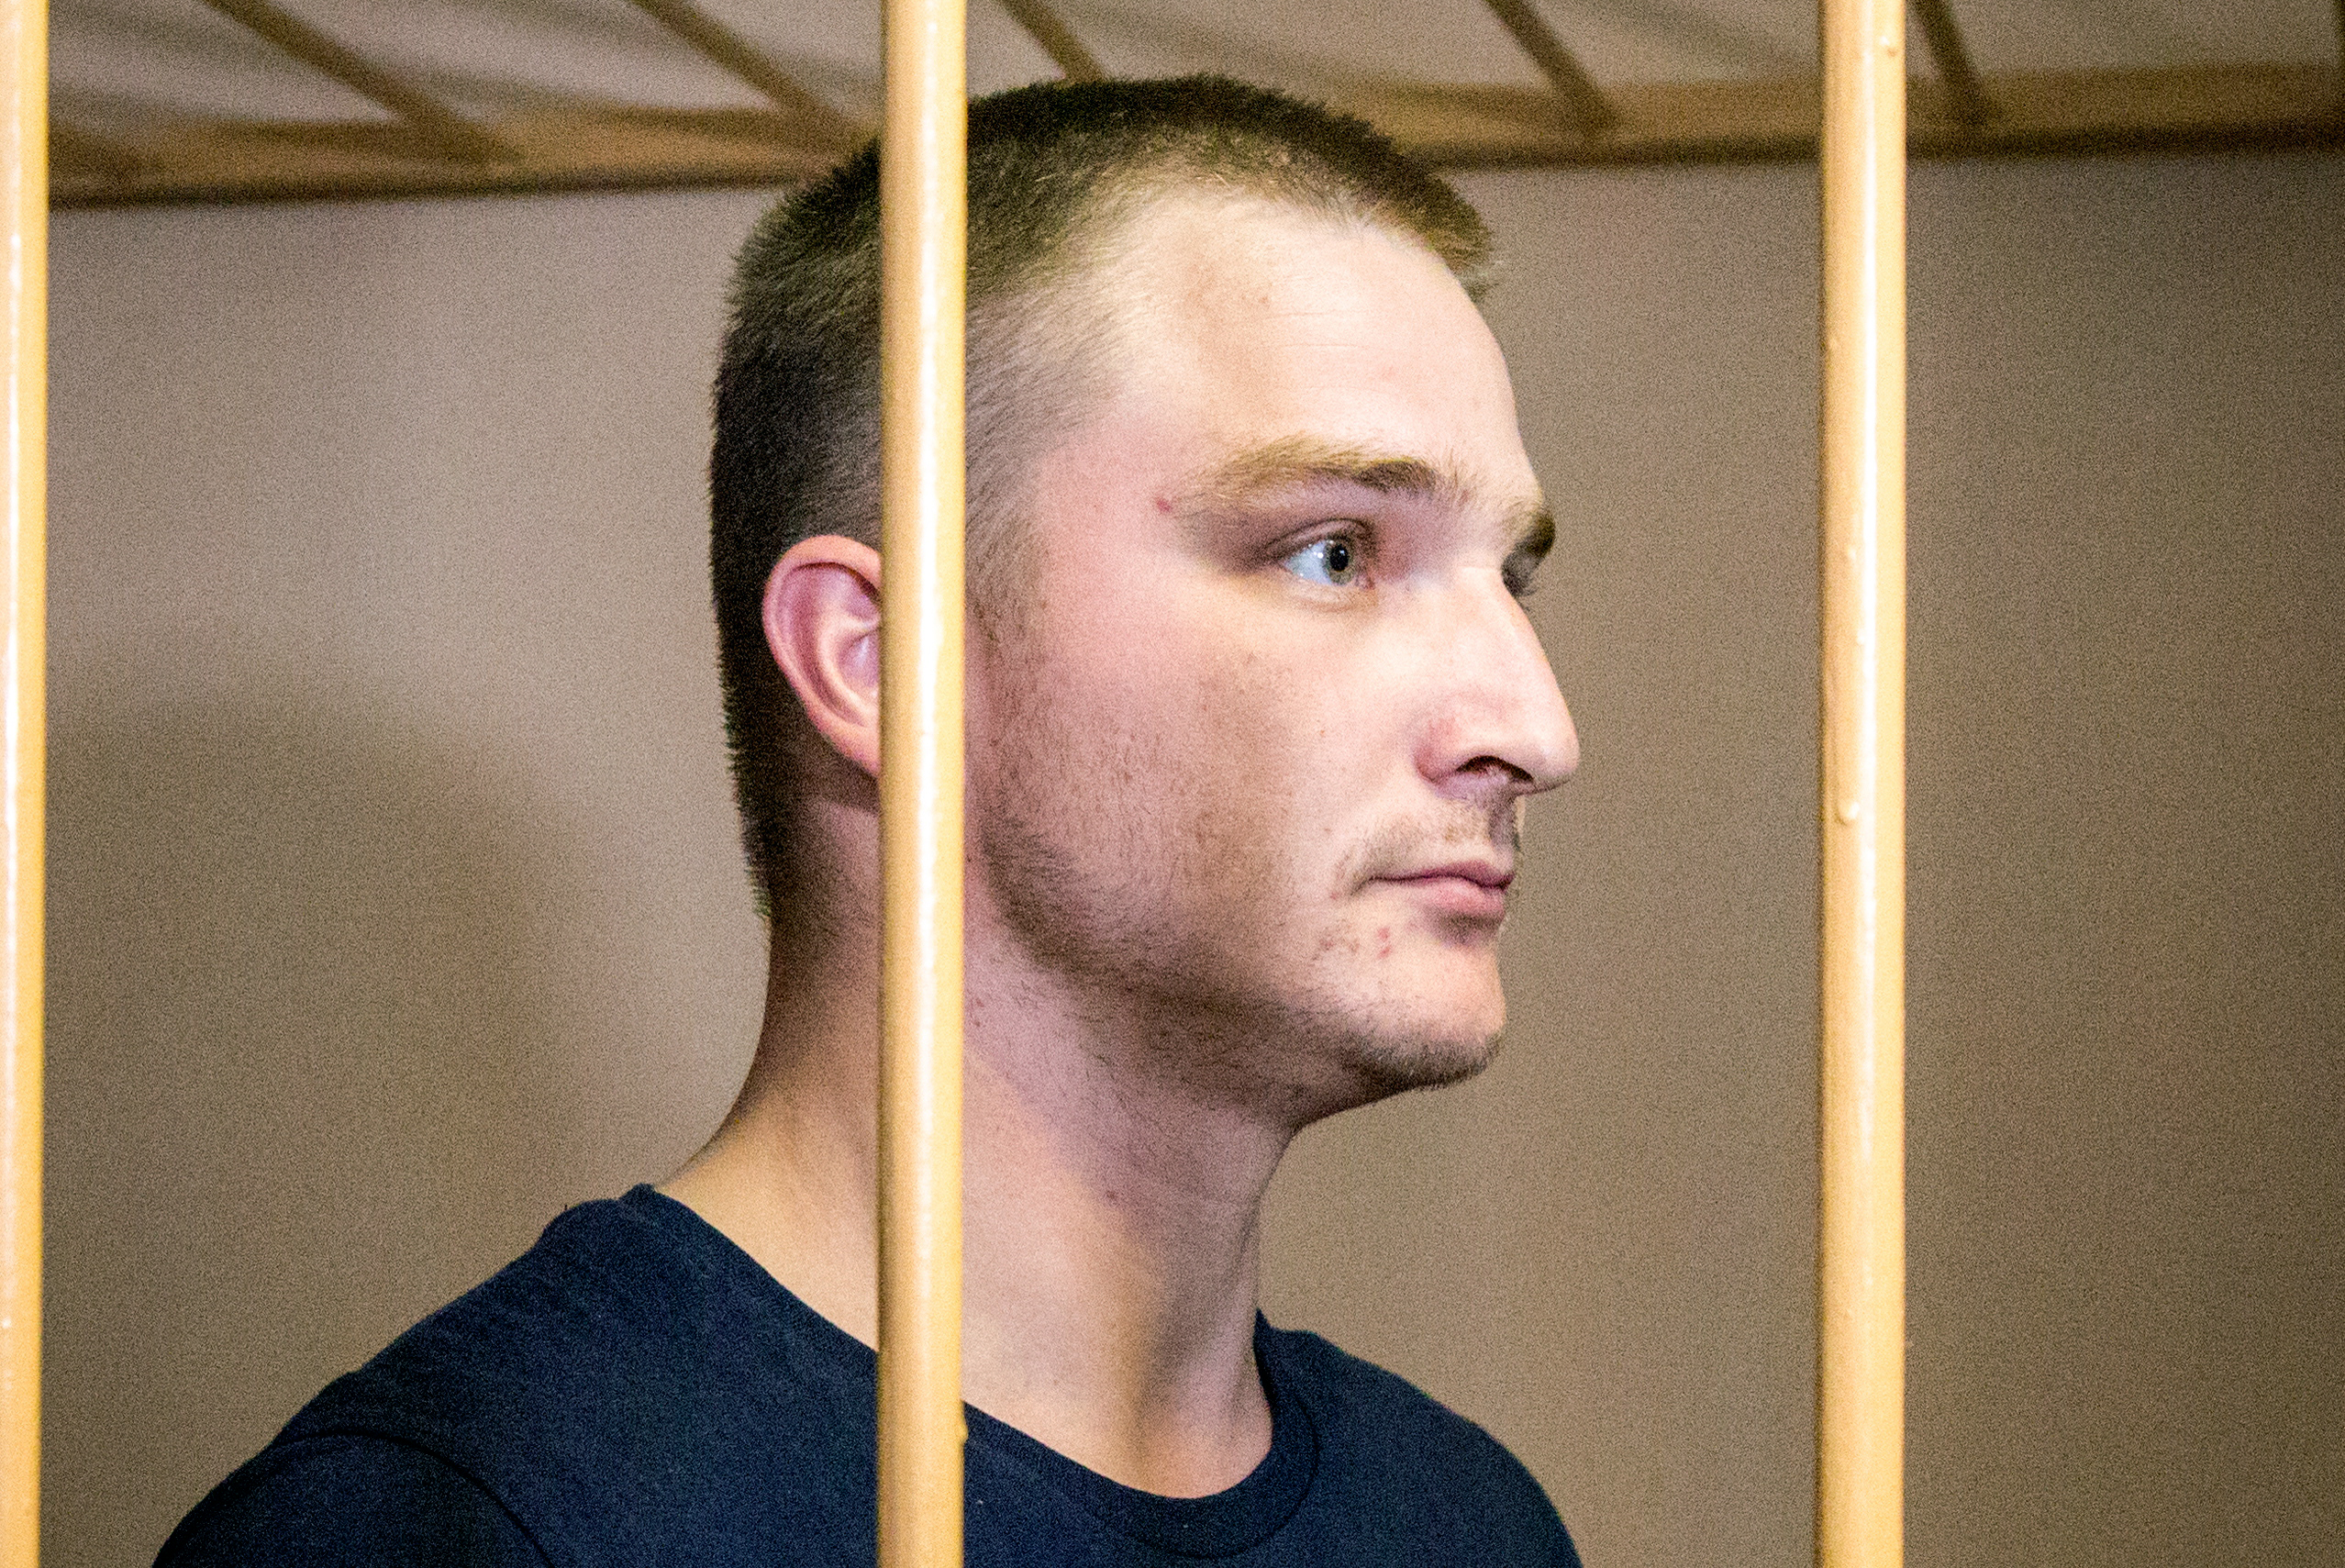 PHOTO: Maxim Yablokov, a senior correctional officer at No1 Yaroslavl Correctional Facility, attends a hearing at Yaroslavl's Zavolzhsky District Court into an application for a warrant to arrest him, July 25, 2018, in Yaroslavl, Russia.